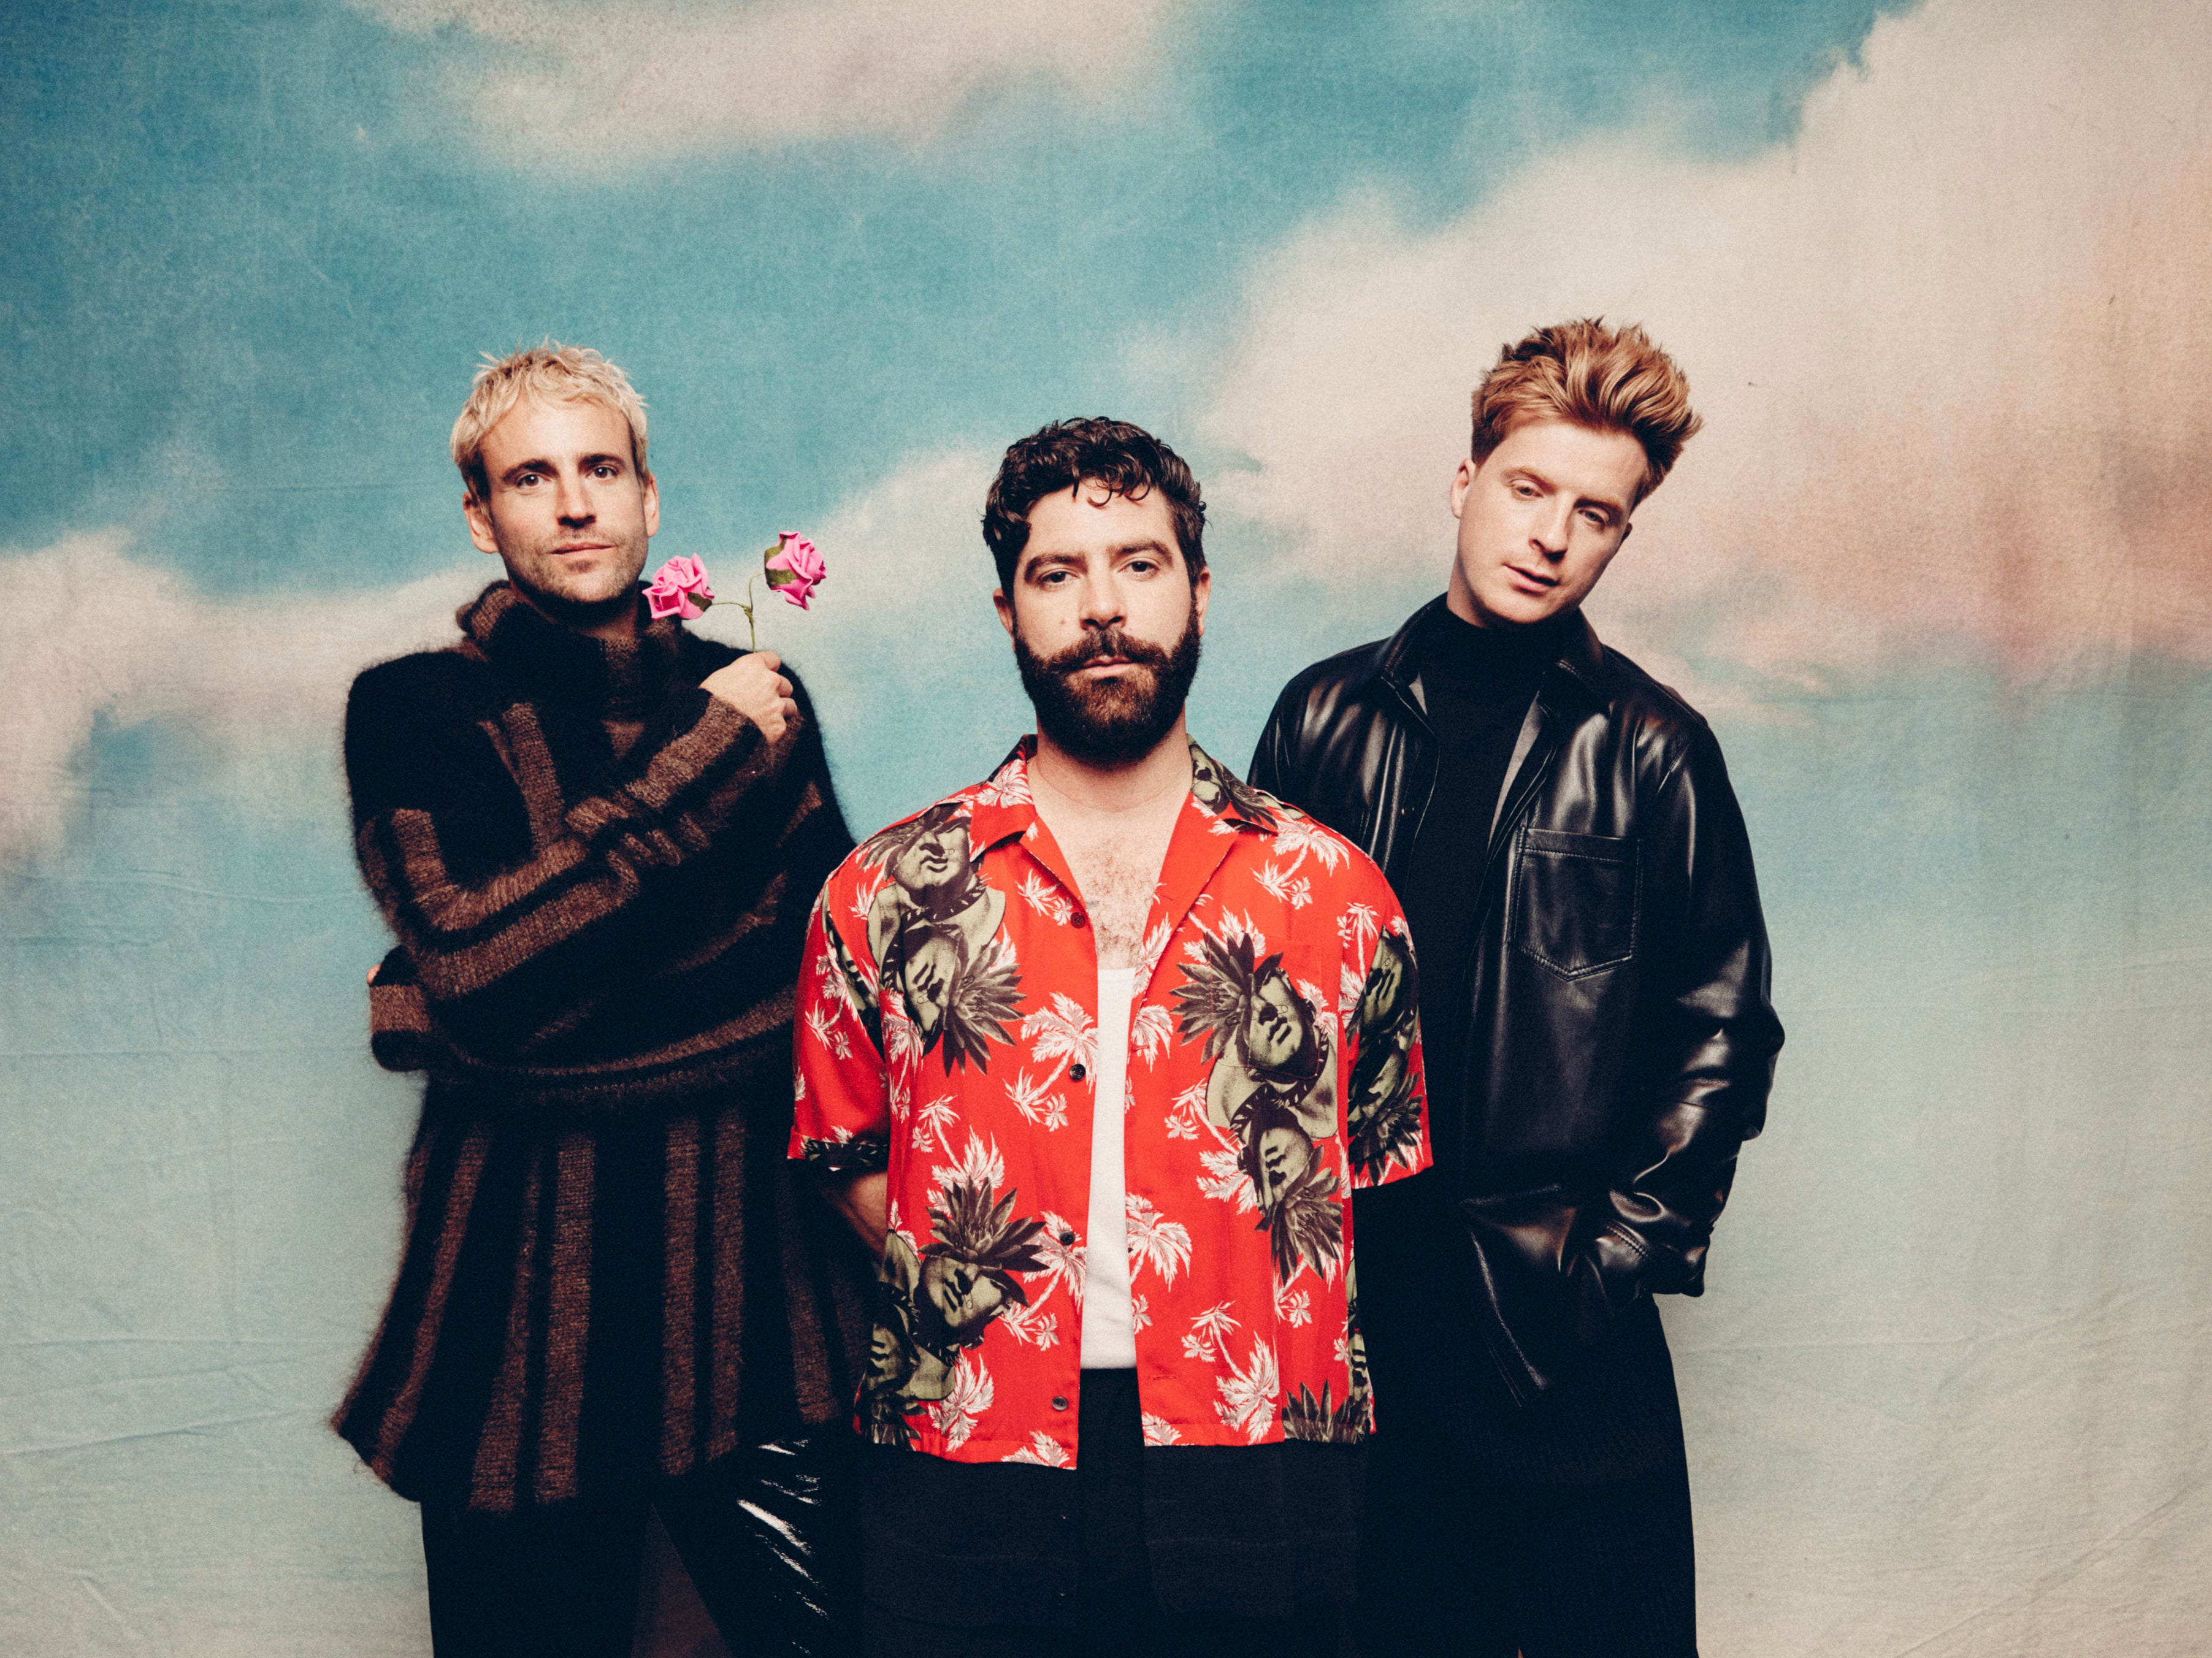 Foals L-R: Jimmy Smith, Yannis Philippakis and Jack Bevan